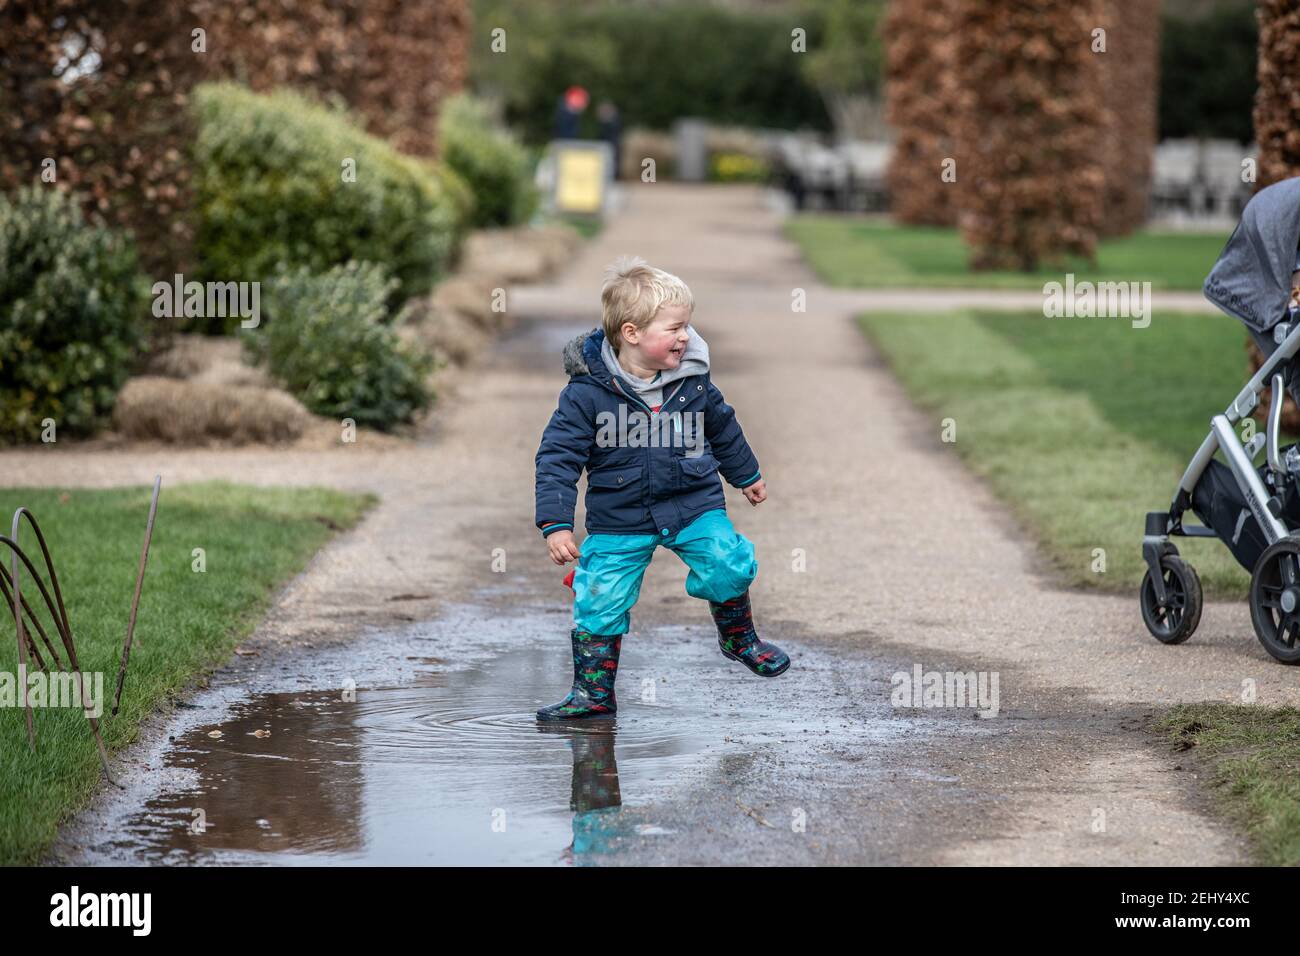 Families enjoying the early signs of Spring at RHS Garden Wisley, Surrey England, United Kingdom Stock Photo